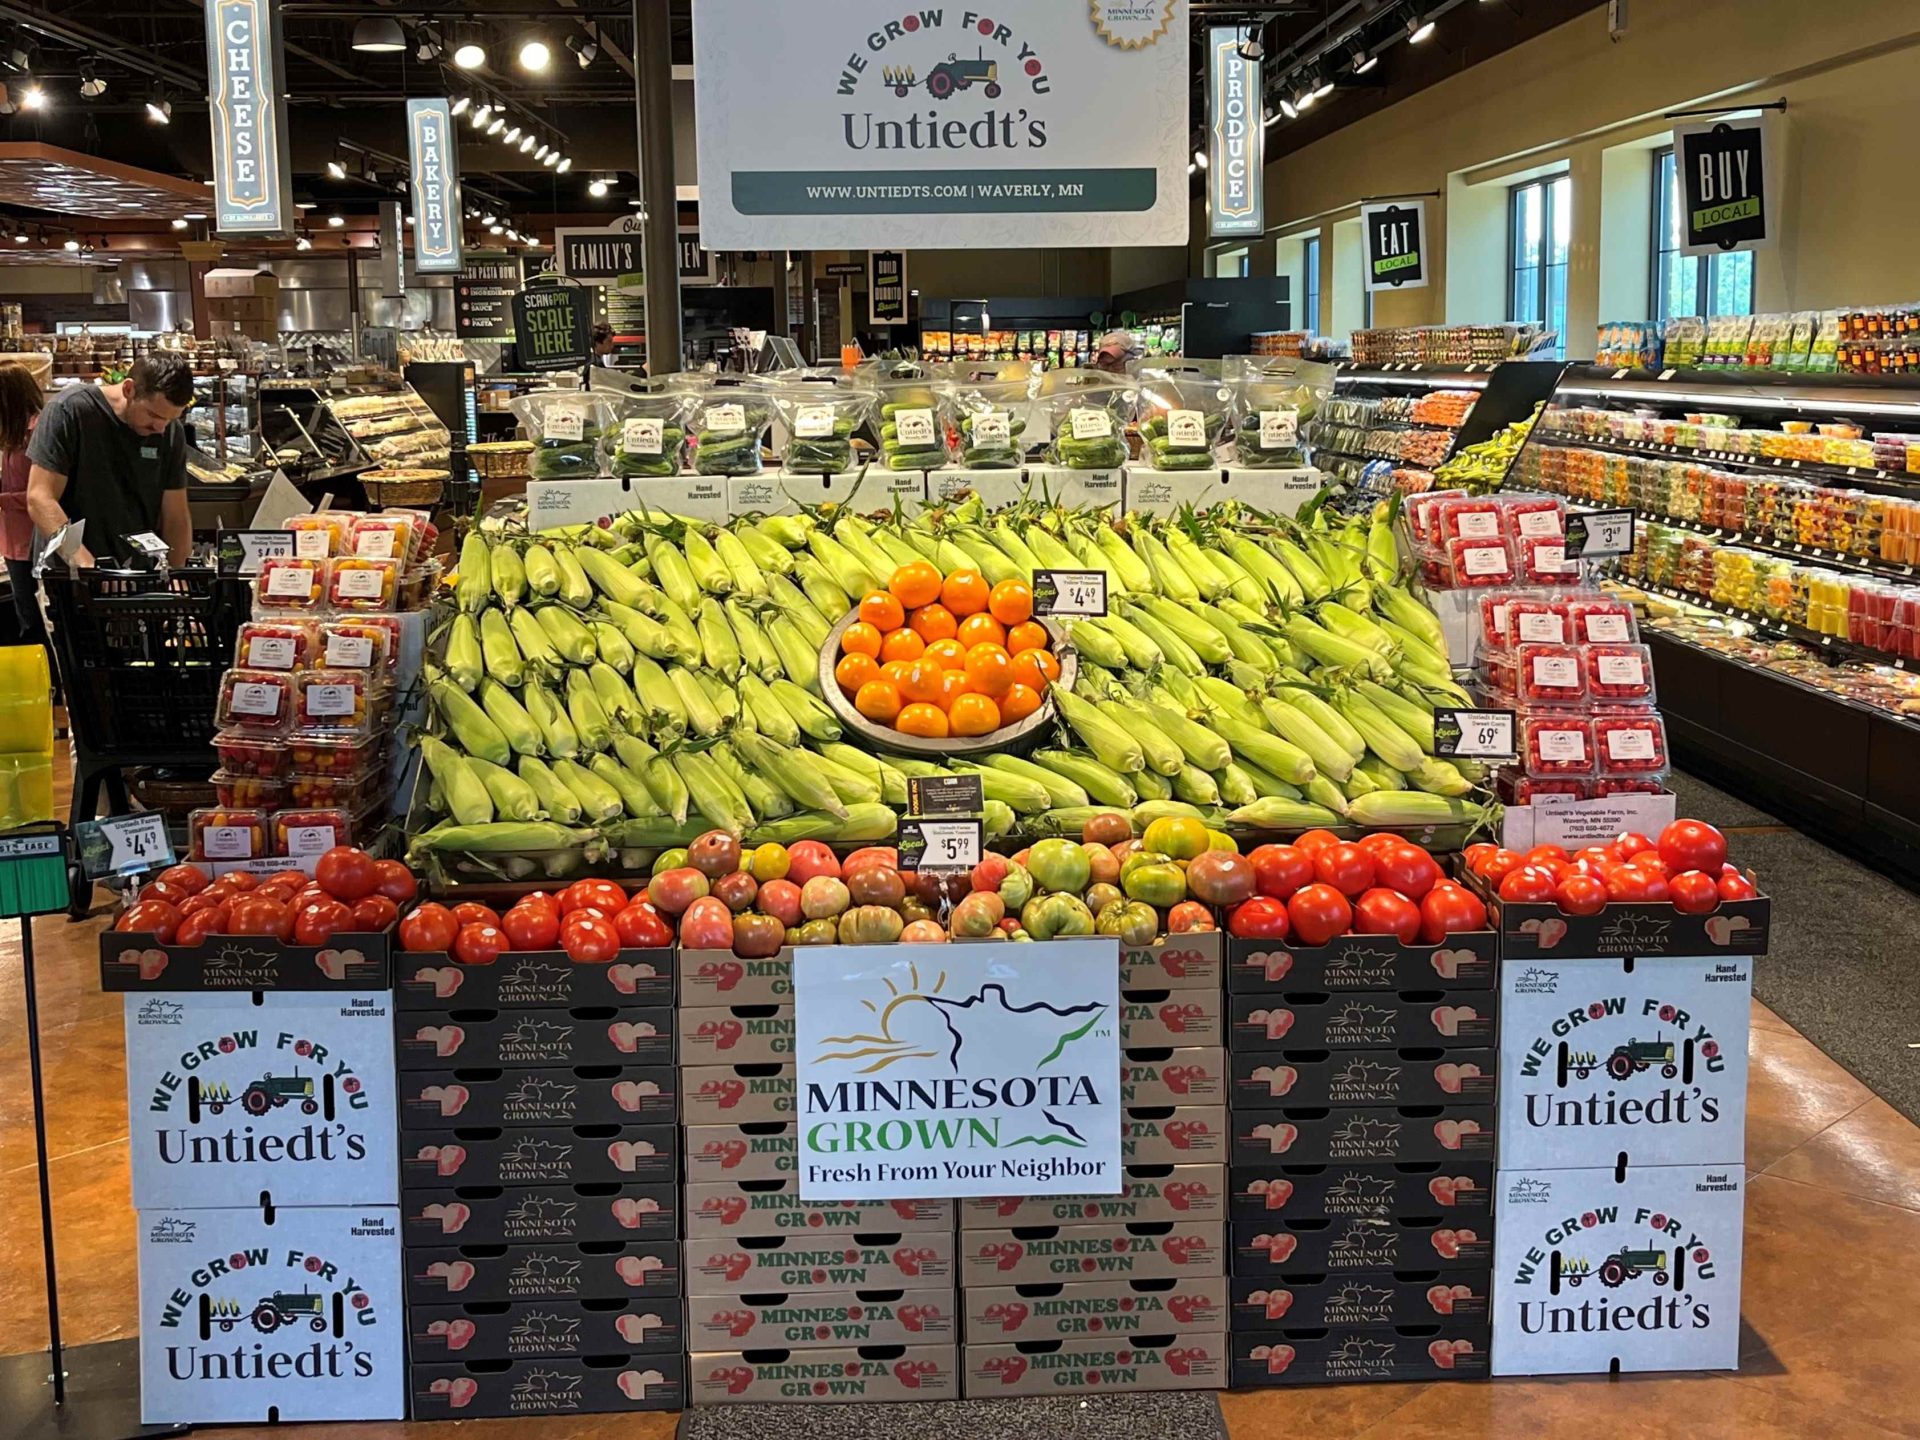 A grocery store produce display at Kowalski's market.